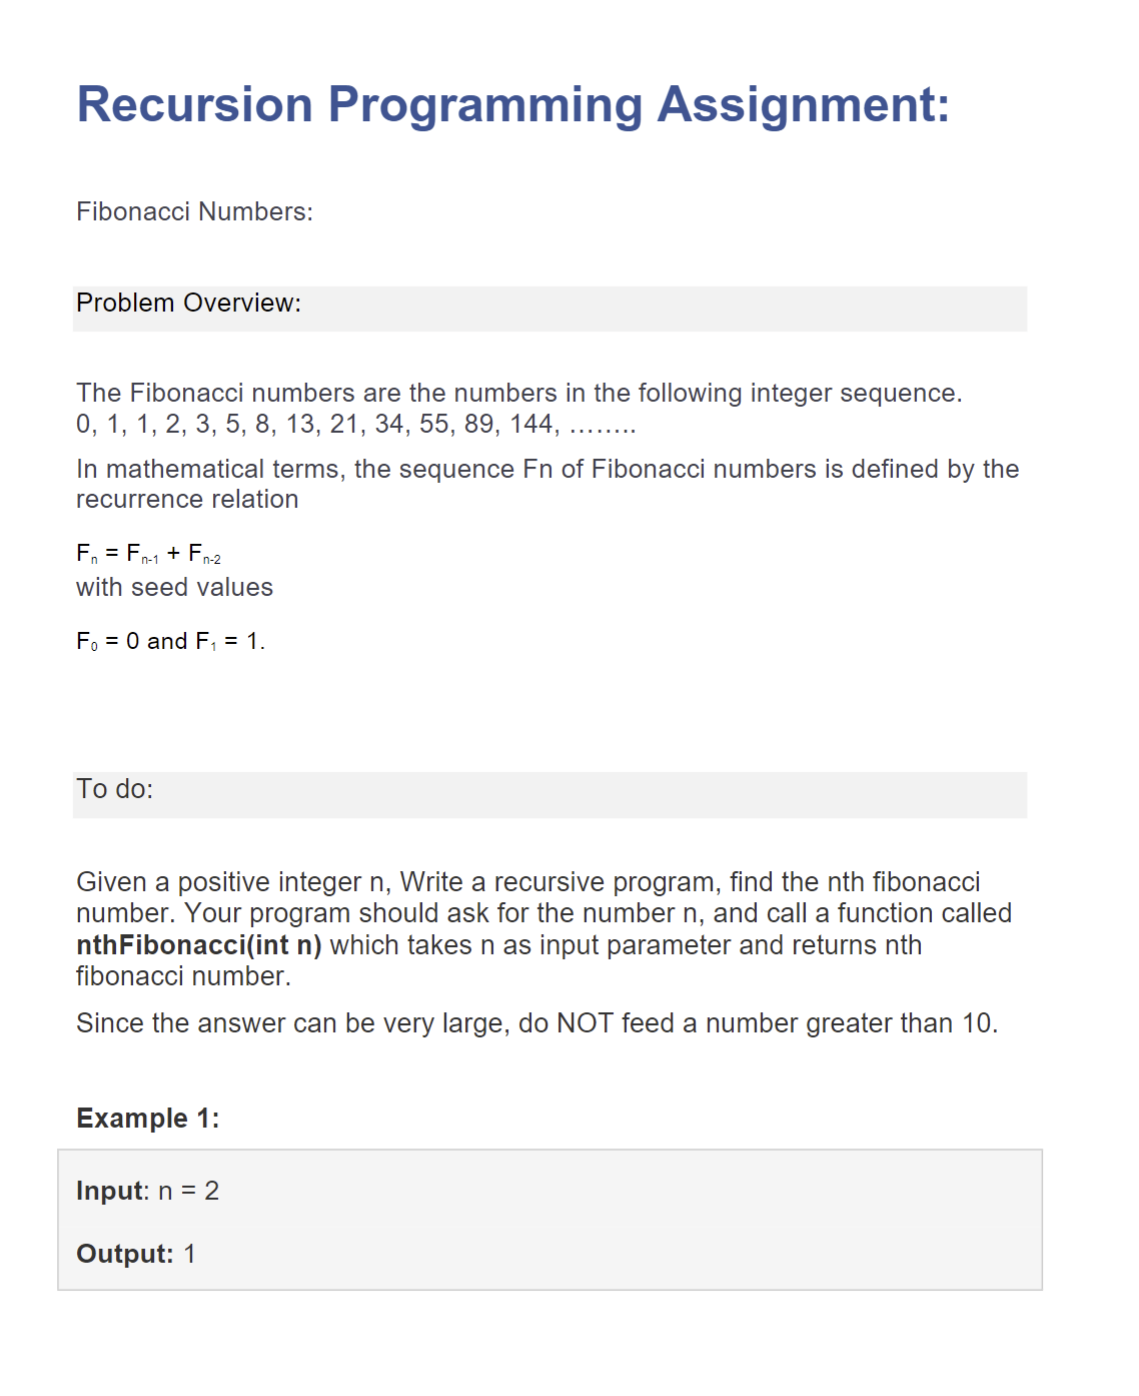 Recursion Programming Assignment:
Fibonacci Numbers:
Problem Overview:
The Fibonacci numbers are the numbers in the following integer sequence.
0, 1, 1, 2, 3, 5, 8, 13, 21, 34, 55, 89, 144,
In mathematical terms, the sequence Fn of Fibonacci numbers is defined by the
recurrence relation
F₁ = Fn-1 + Fn-2
with seed values
F₁ = 0 and F₁ = 1.
To do:
Given a positive integer n, Write a recursive program, find the nth fibonacci
number. Your program should ask for the number n, and call a function called
nthFibonacci(int n) which takes n as input parameter and returns nth
fibonacci number.
Since the answer can be very large, do NOT feed a number greater than 10.
Example 1:
Input: n = 2
Output: 1